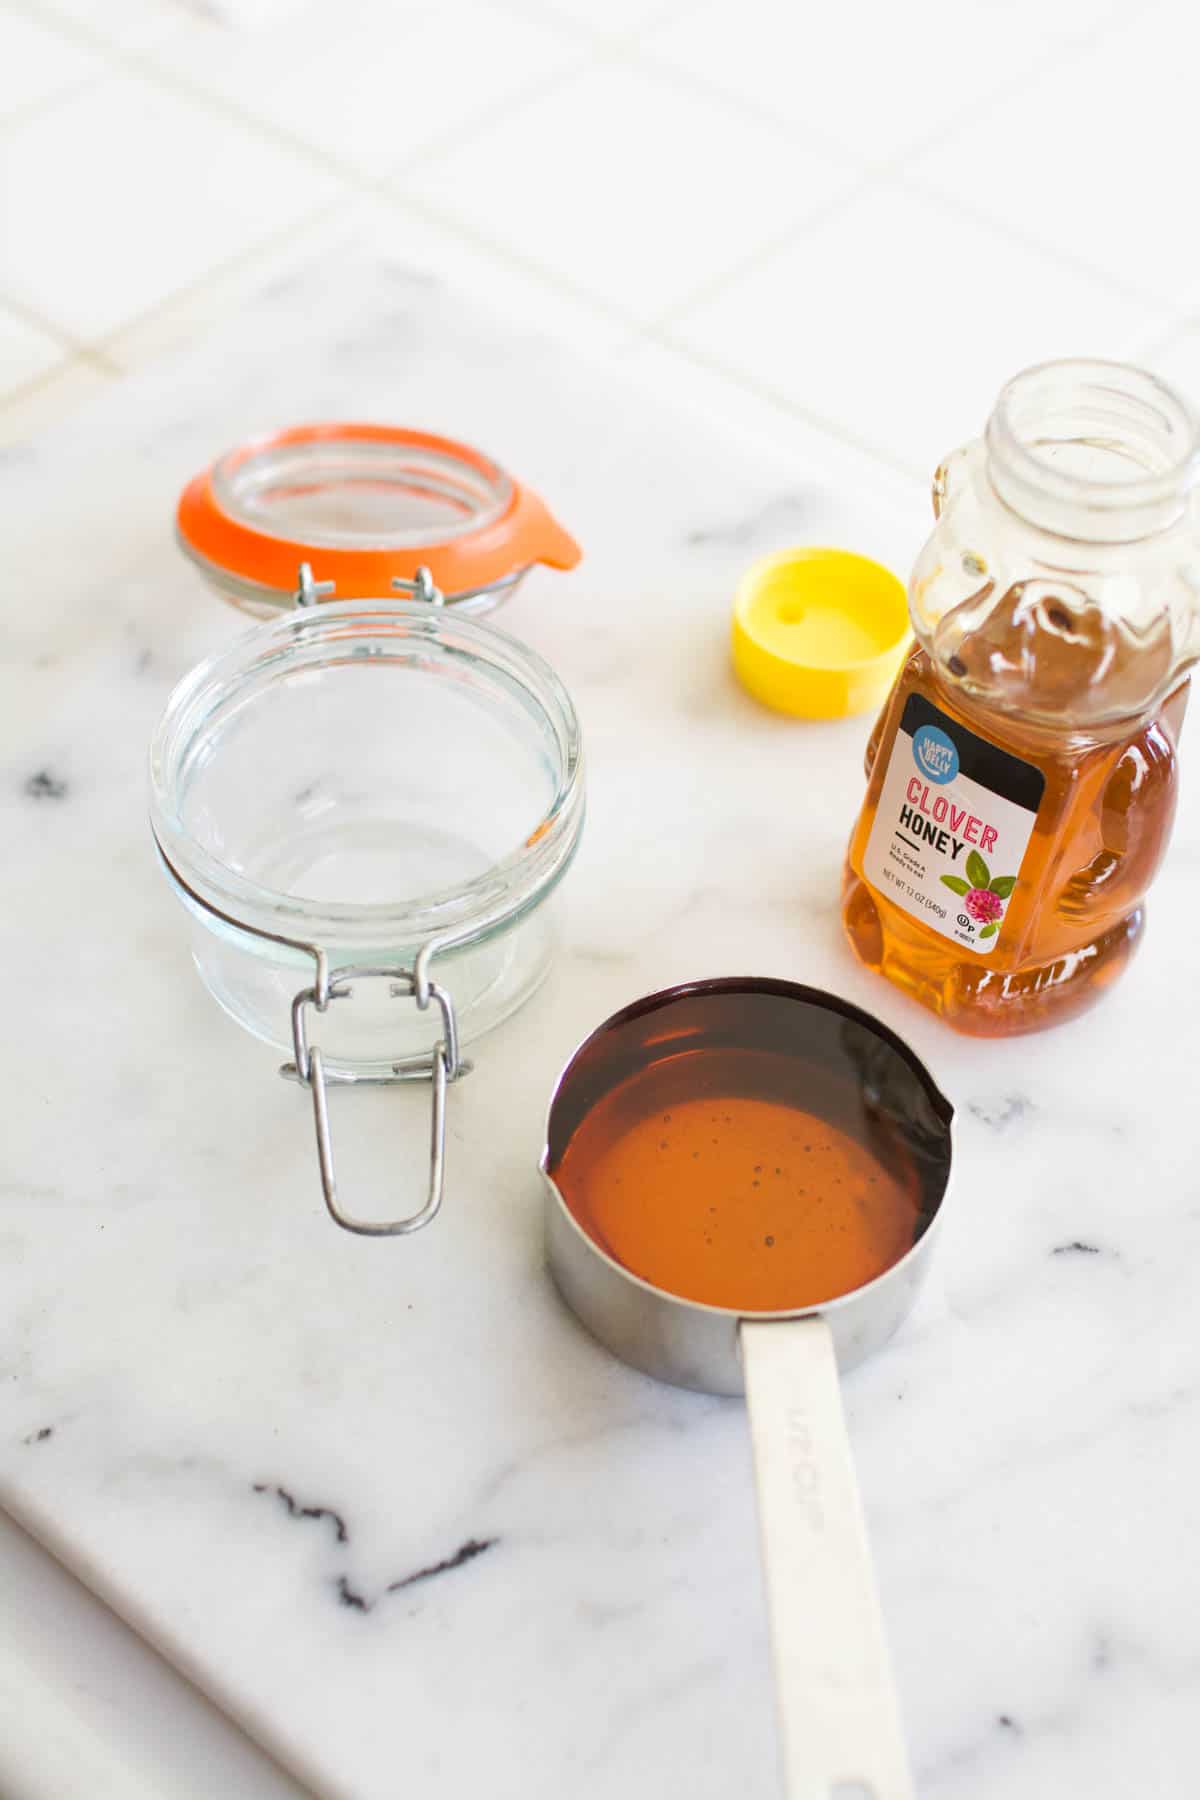 A glass jar on a counter next to a measuring cup of honey.